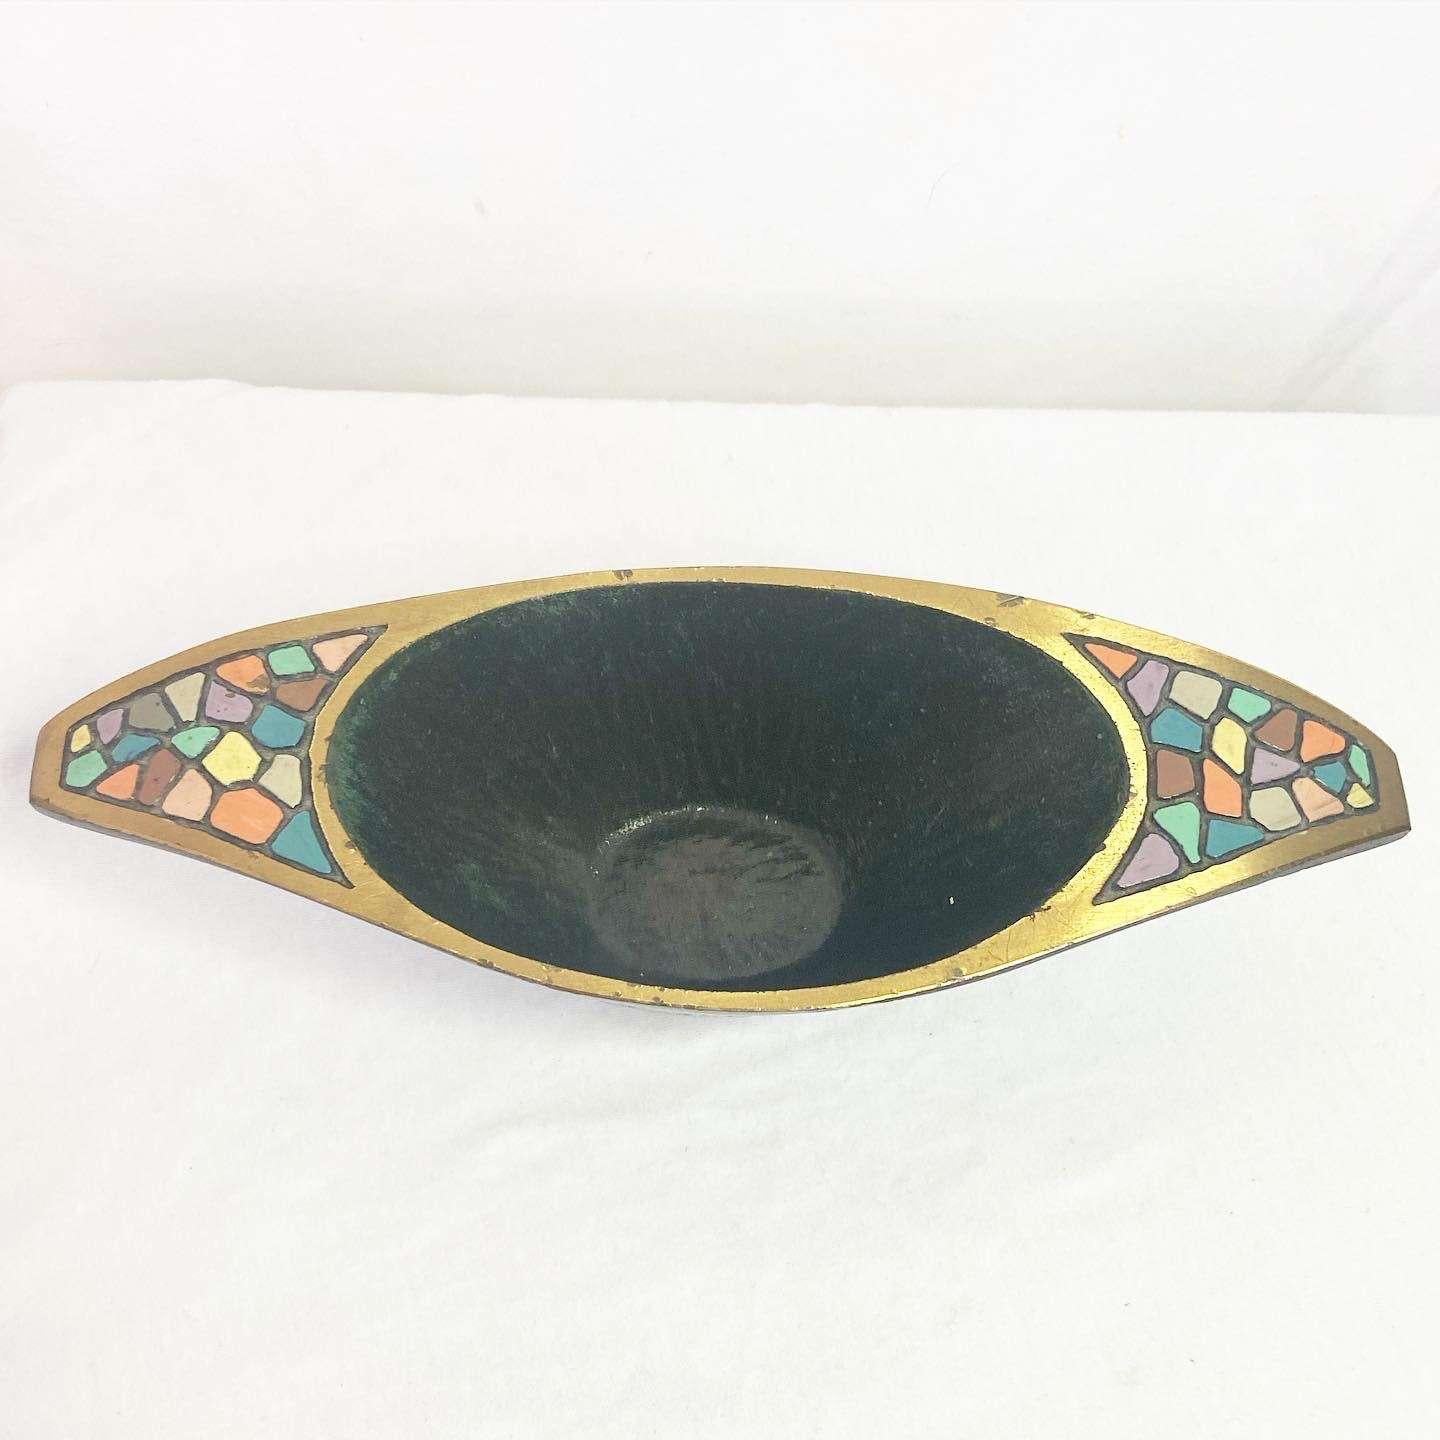 Exceptional vintage Israeli brass dish. Features a colorful enameled accent.
